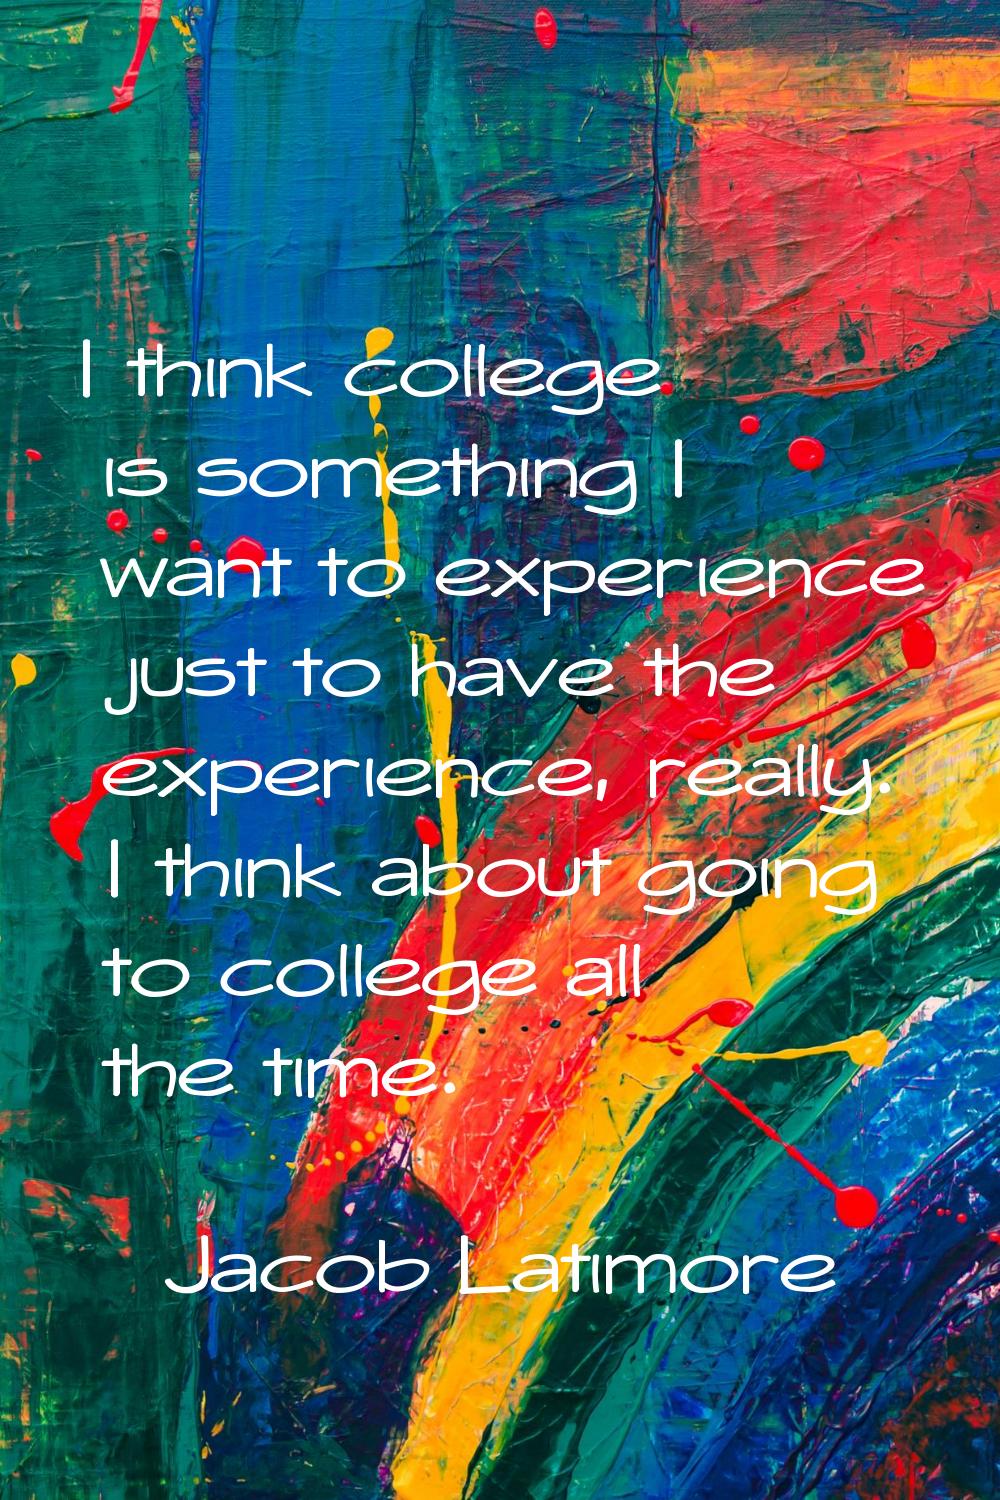 I think college is something I want to experience just to have the experience, really. I think abou